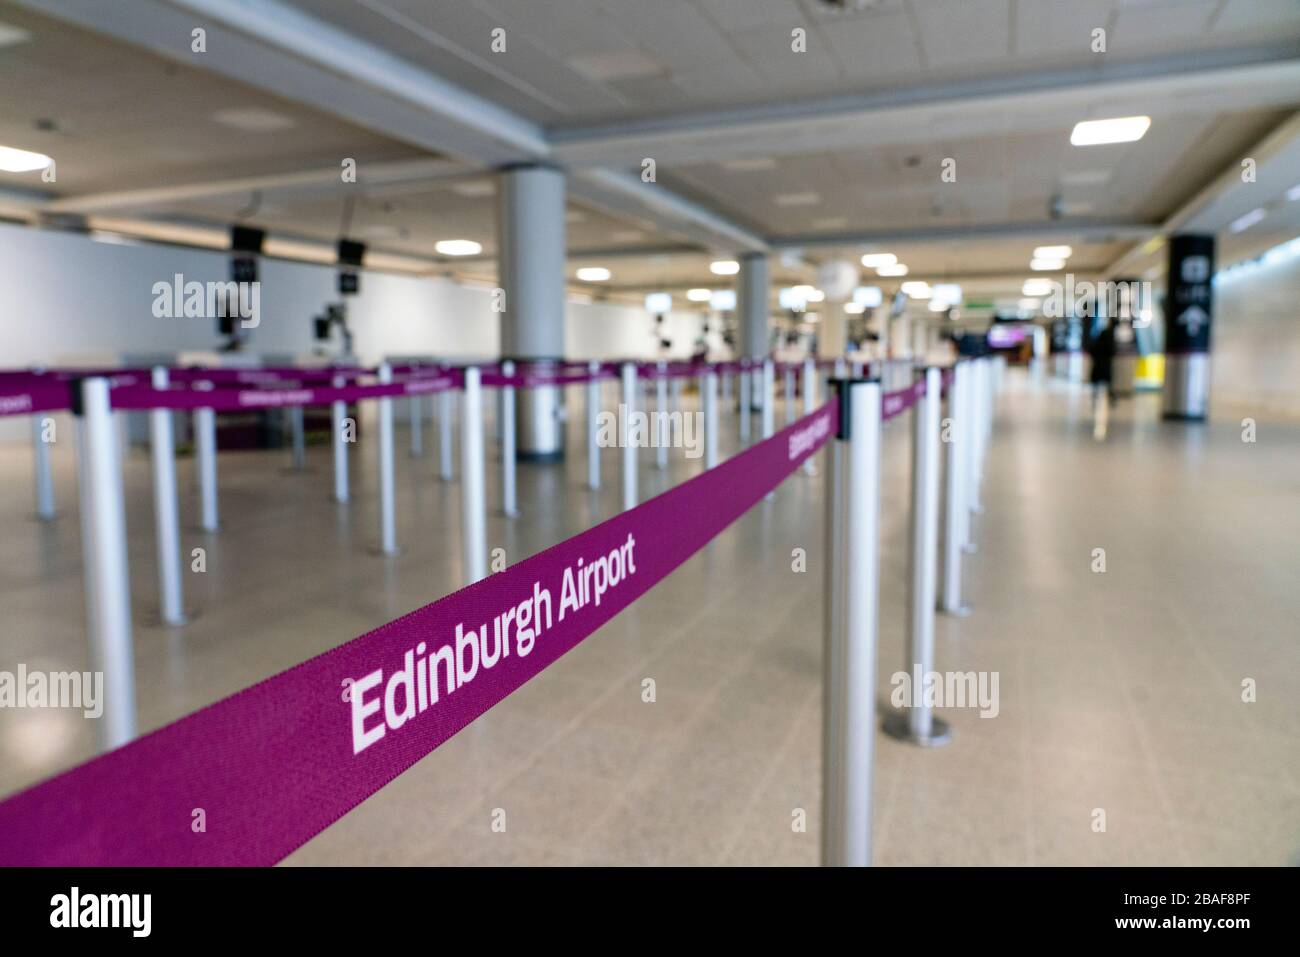 Edinburgh, Scotland, UK. 27 March, 2020. Interior views of a deserted Edinburgh Airport during the coronavirus pandemic. With very few flights during the current Covid-19 crisis passengers are scarce in the terminal building. Iain Masterton/Alamy Live News Stock Photo